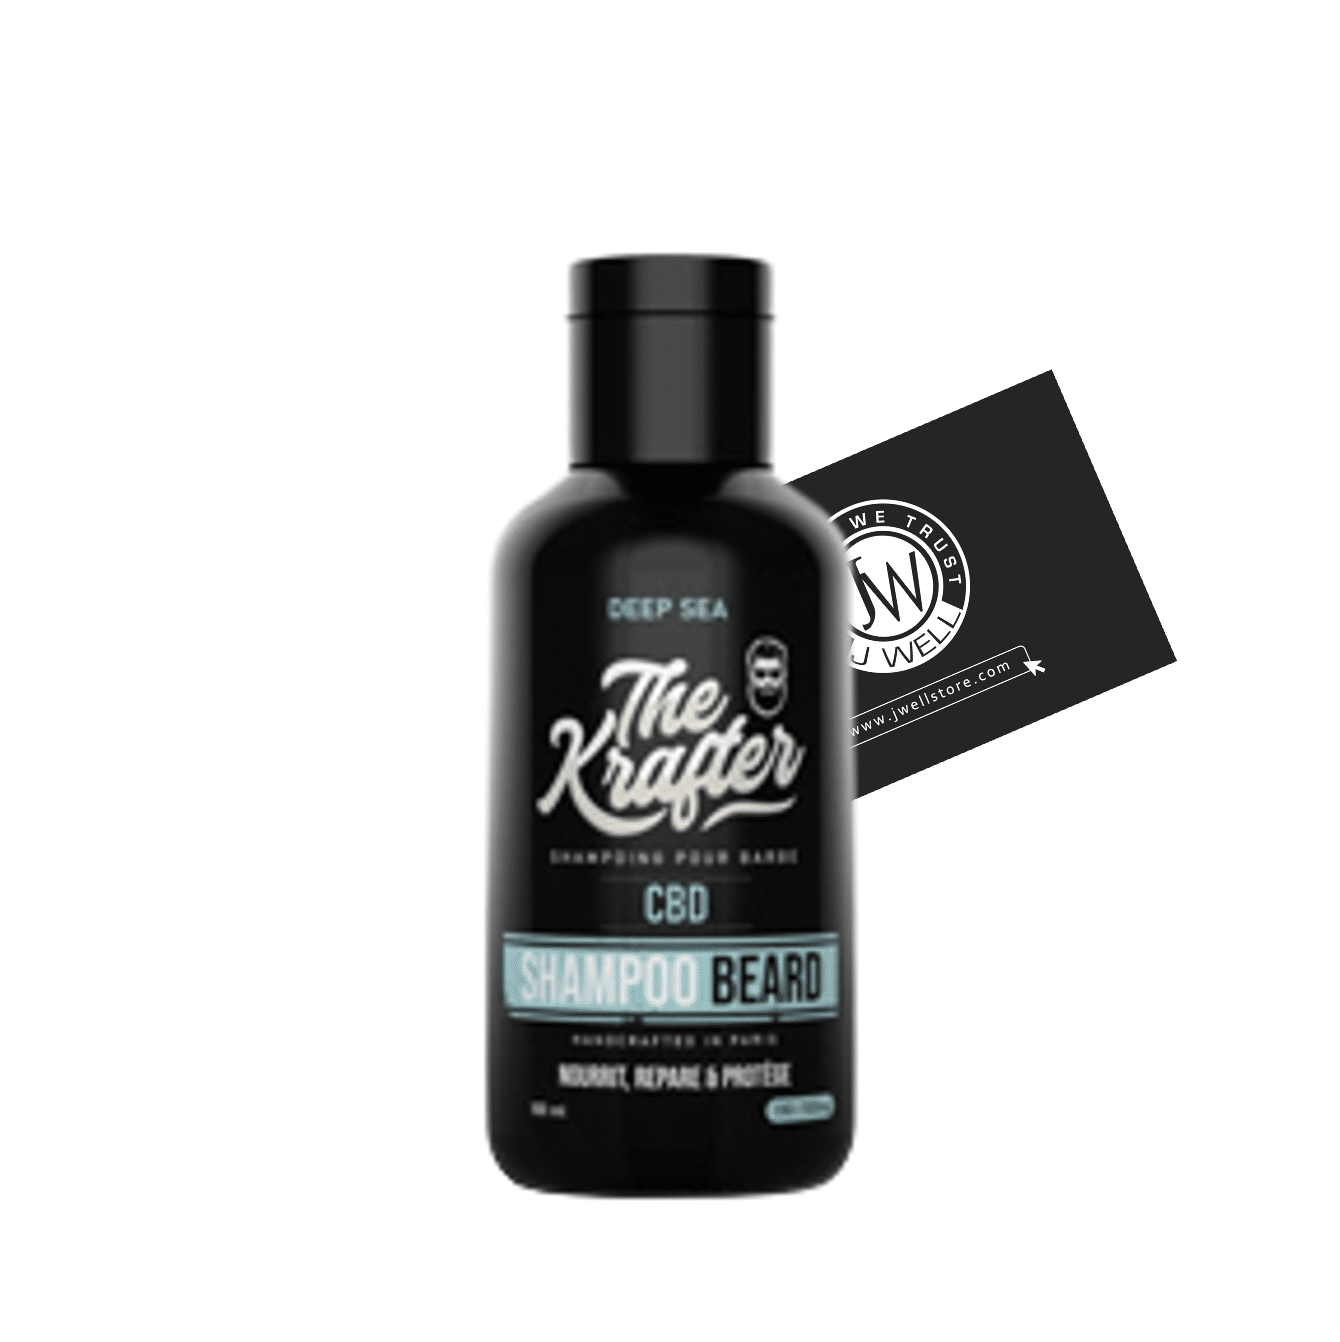 Image Shampoing pour barbe CBD 100 ml The Krafter